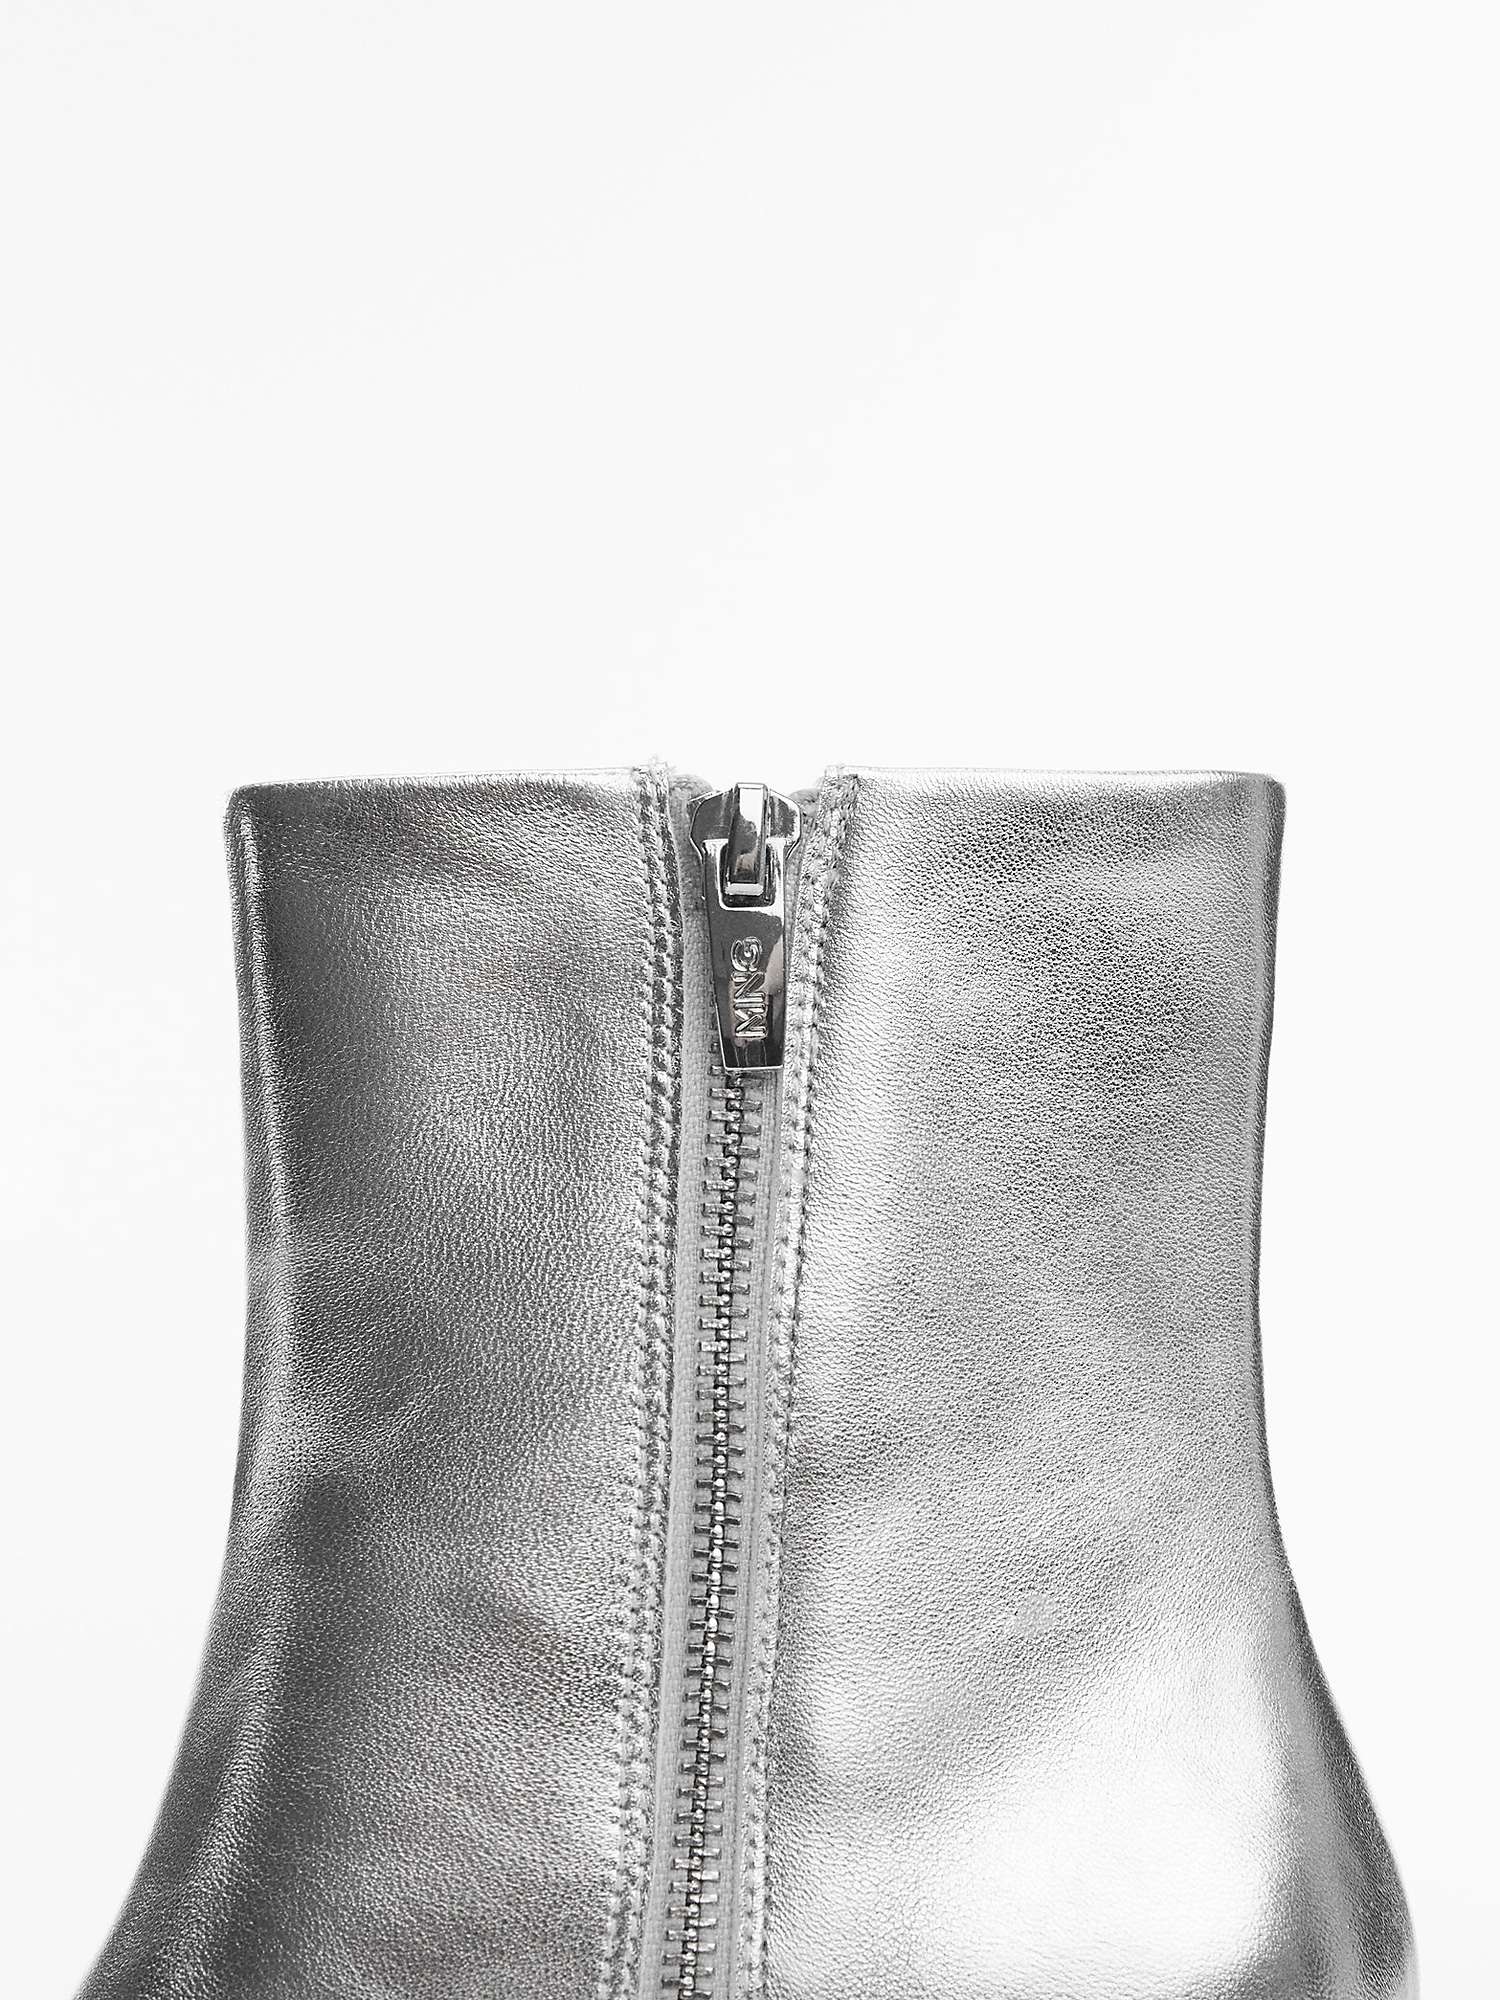 Buy Mango Dadly Kitten Heel Leather Ankle Boots, Silver Online at johnlewis.com